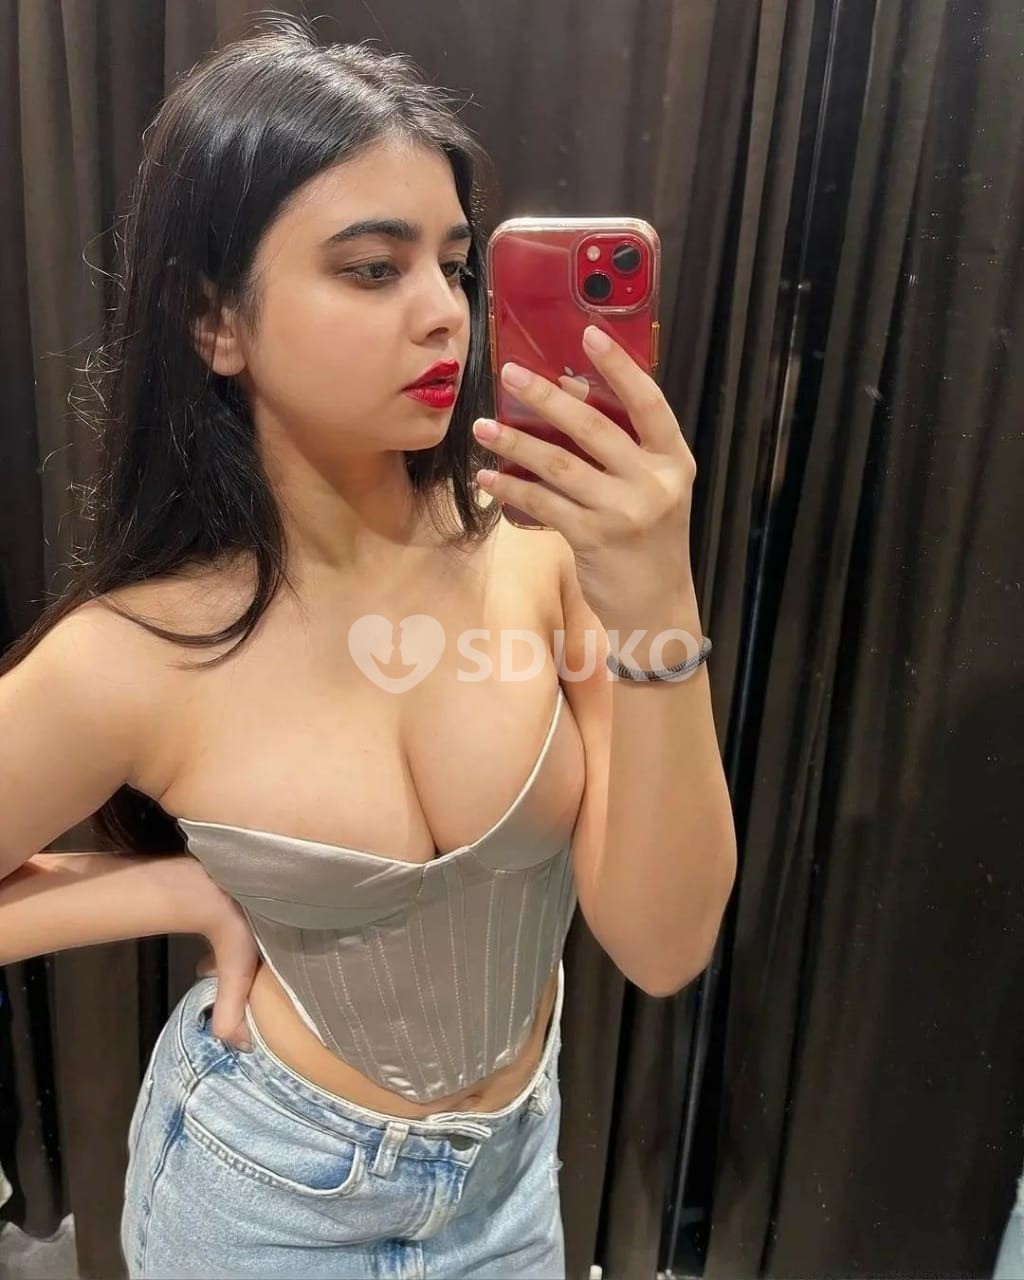 GOREGAON VIP TODAY LOW;) PRICE ESCORT 🥰SERVICE 100% SAFE AND SECURE ANYTIME CALL ME 24 X 7 SERVICE AVAILABLE 100% SAF